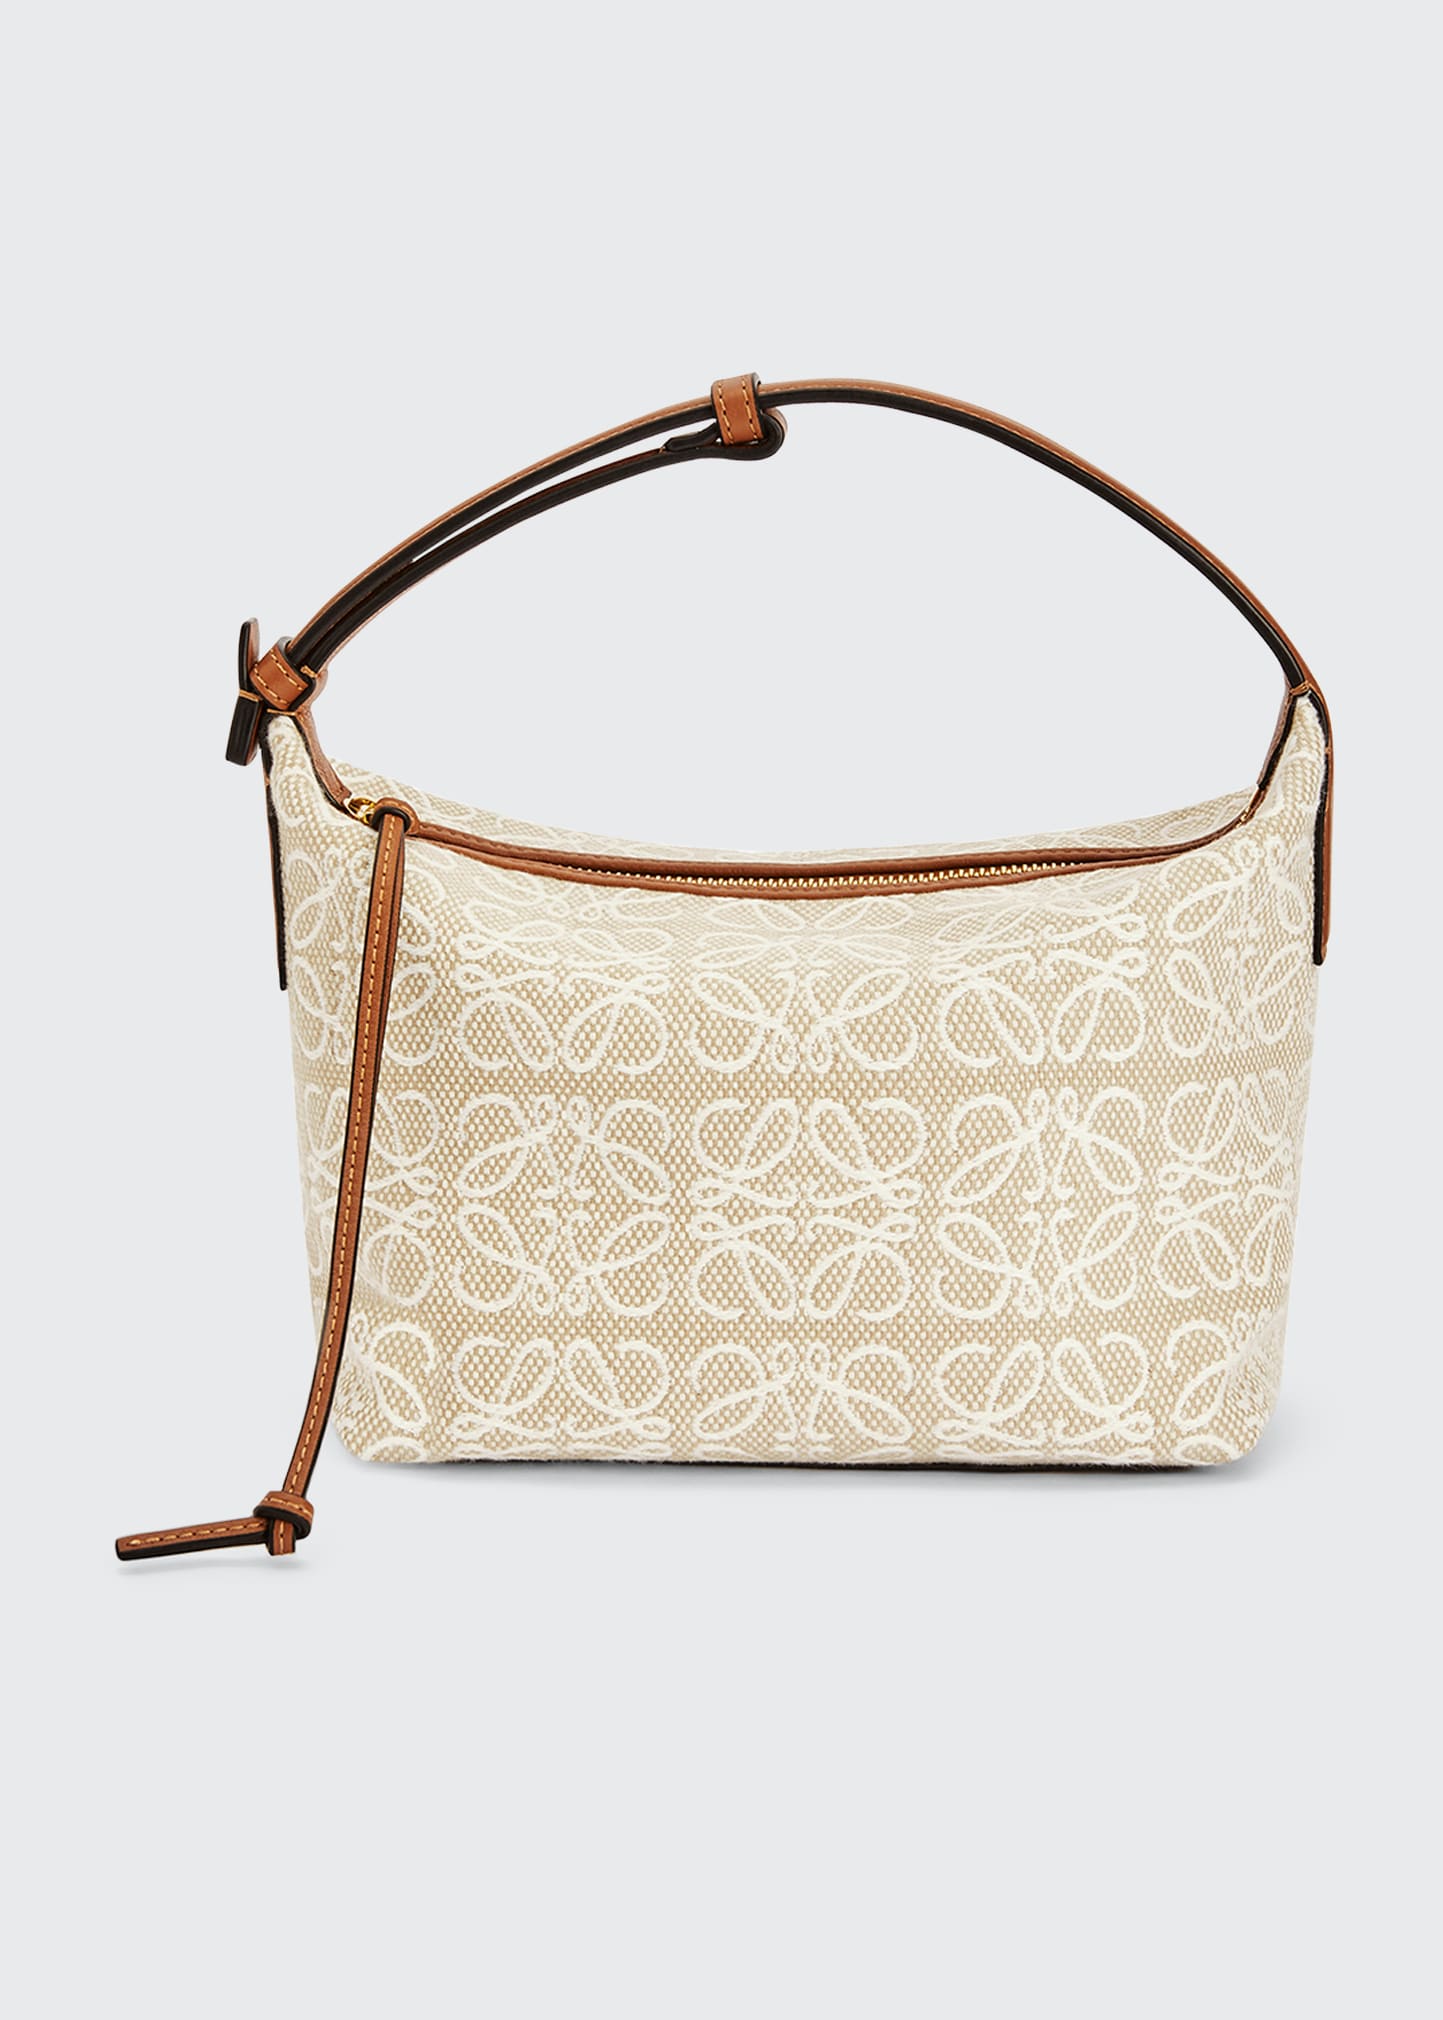 Cubi Small Anagram Tote in White - Loewe